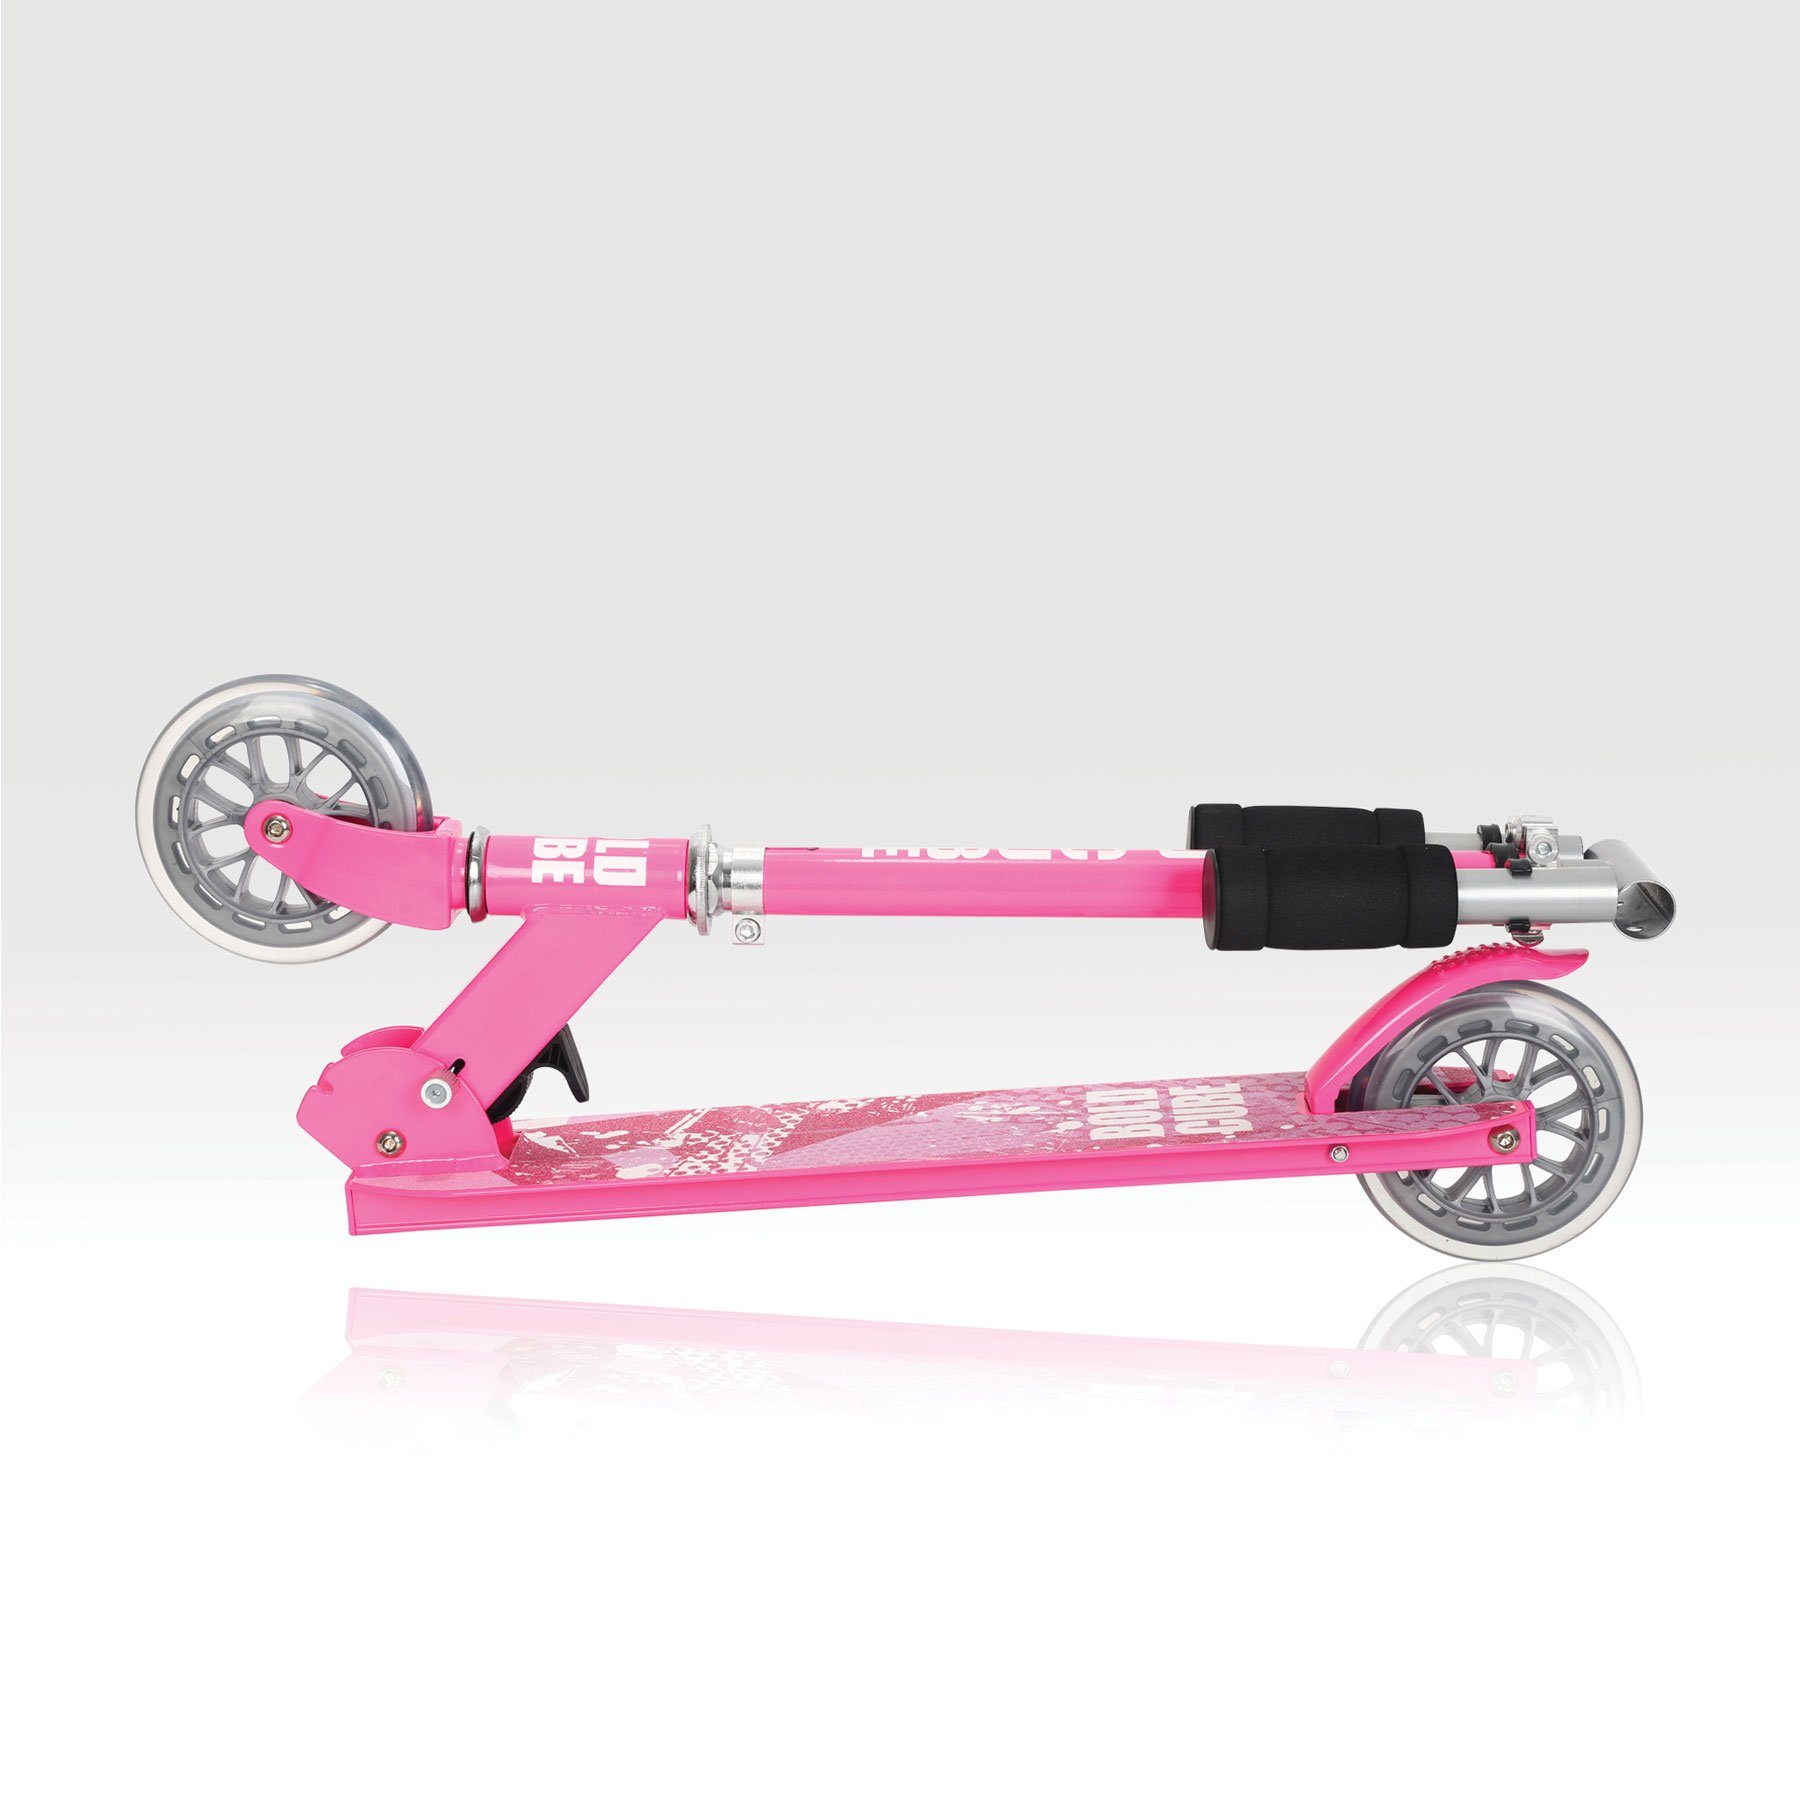 BOLDCUBE Scooter Pink 2-Rad Scooter